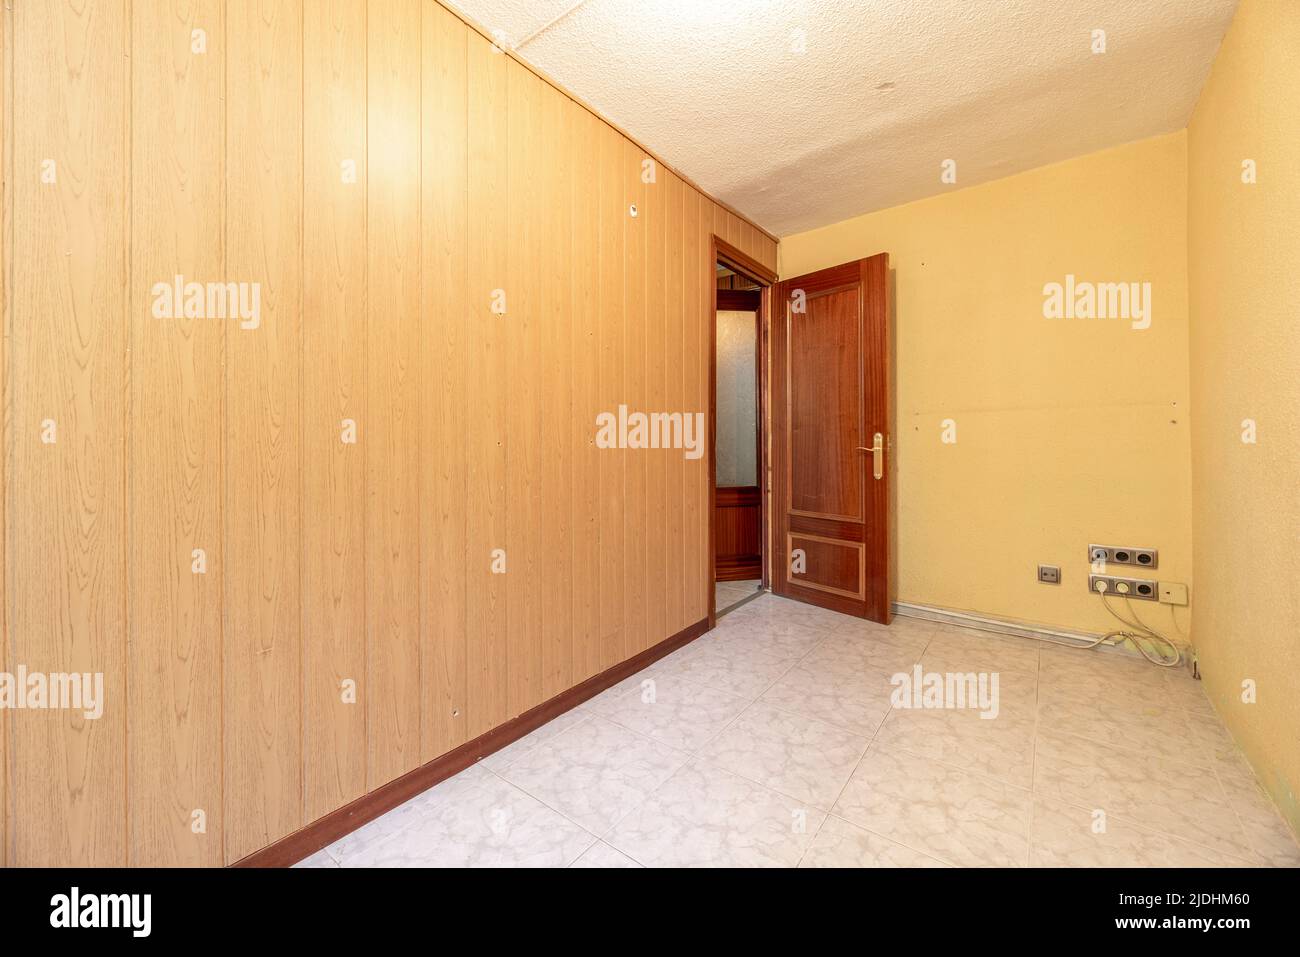 Empty room with wall covered in wood-like PVC tongue-and-groove and ceramic tile floors Stock Photo